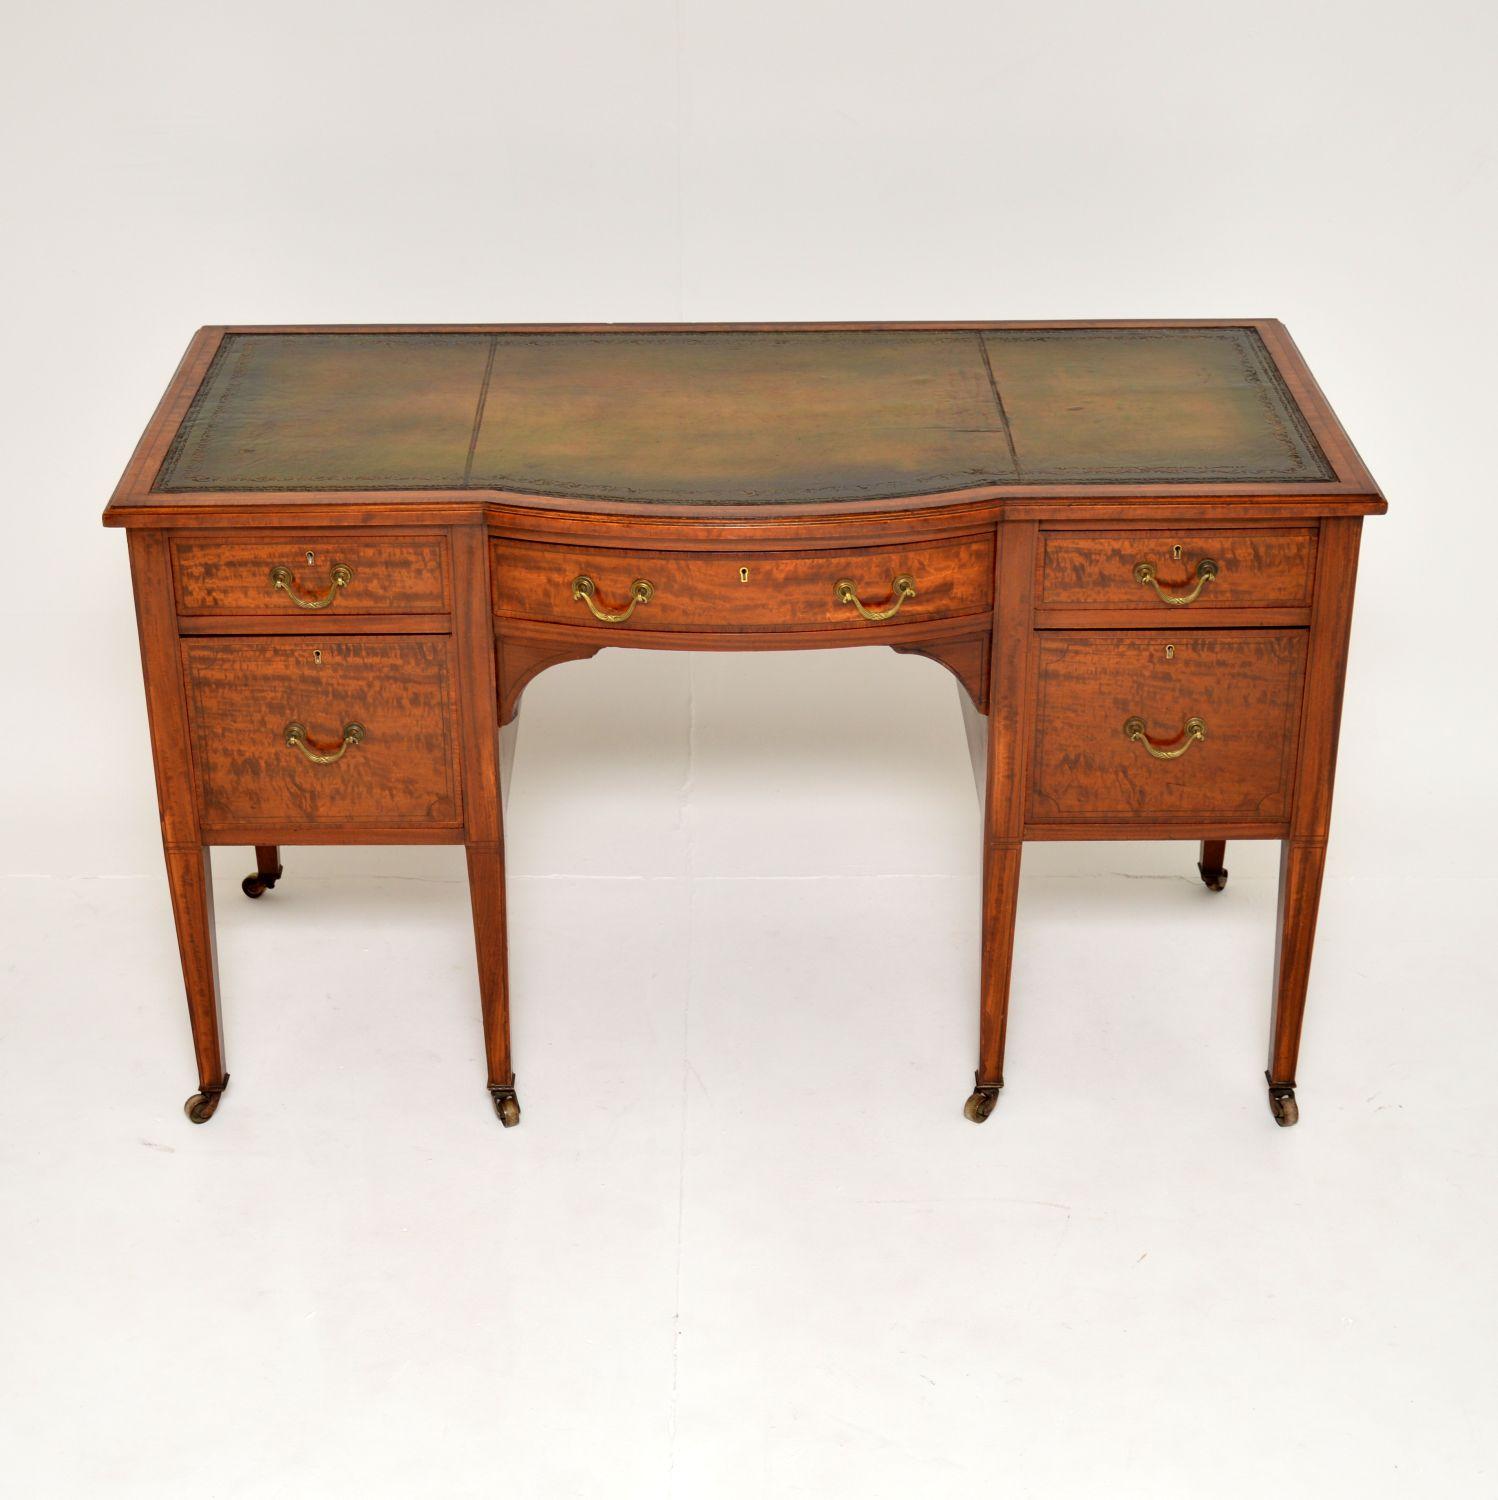 An excellent original antique inlaid satin wood desk with an inset leather top. This was made in England, it dates from around the 1890-1910 period.

This is beautifully made and is of amazing quality. The makers stamp ‘H. Mawer & Stephenson’ is